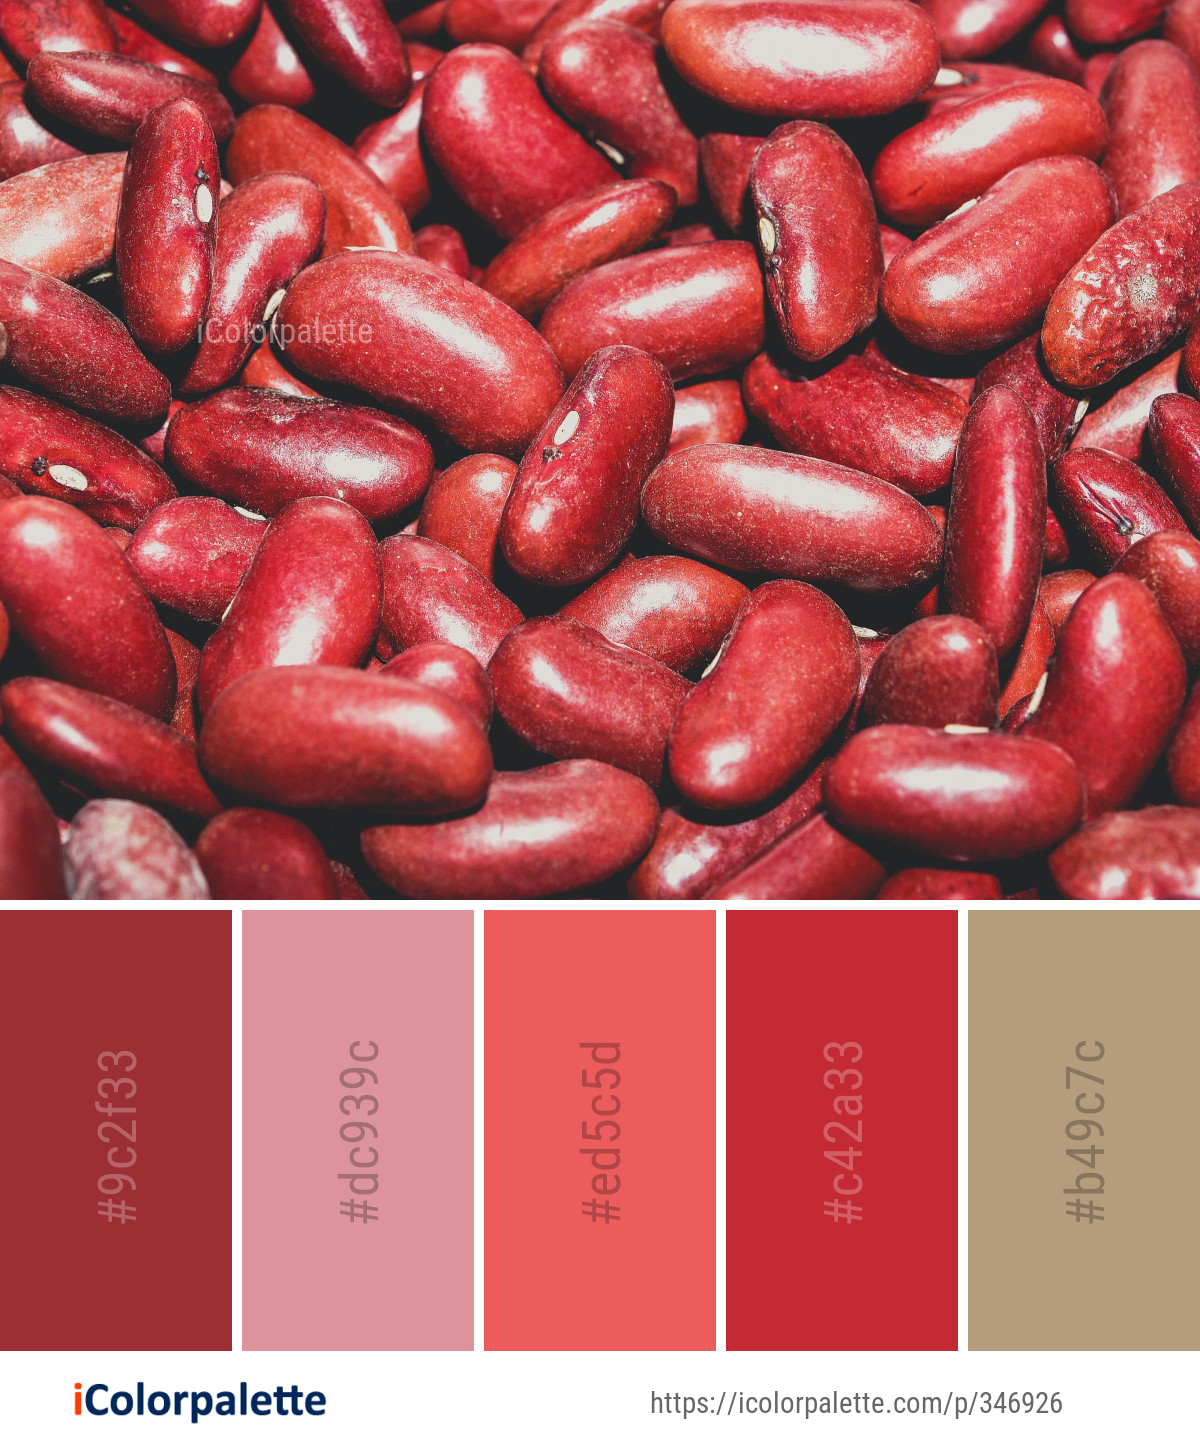 Color Palette Ideas from Azuki Bean Ingredient Image